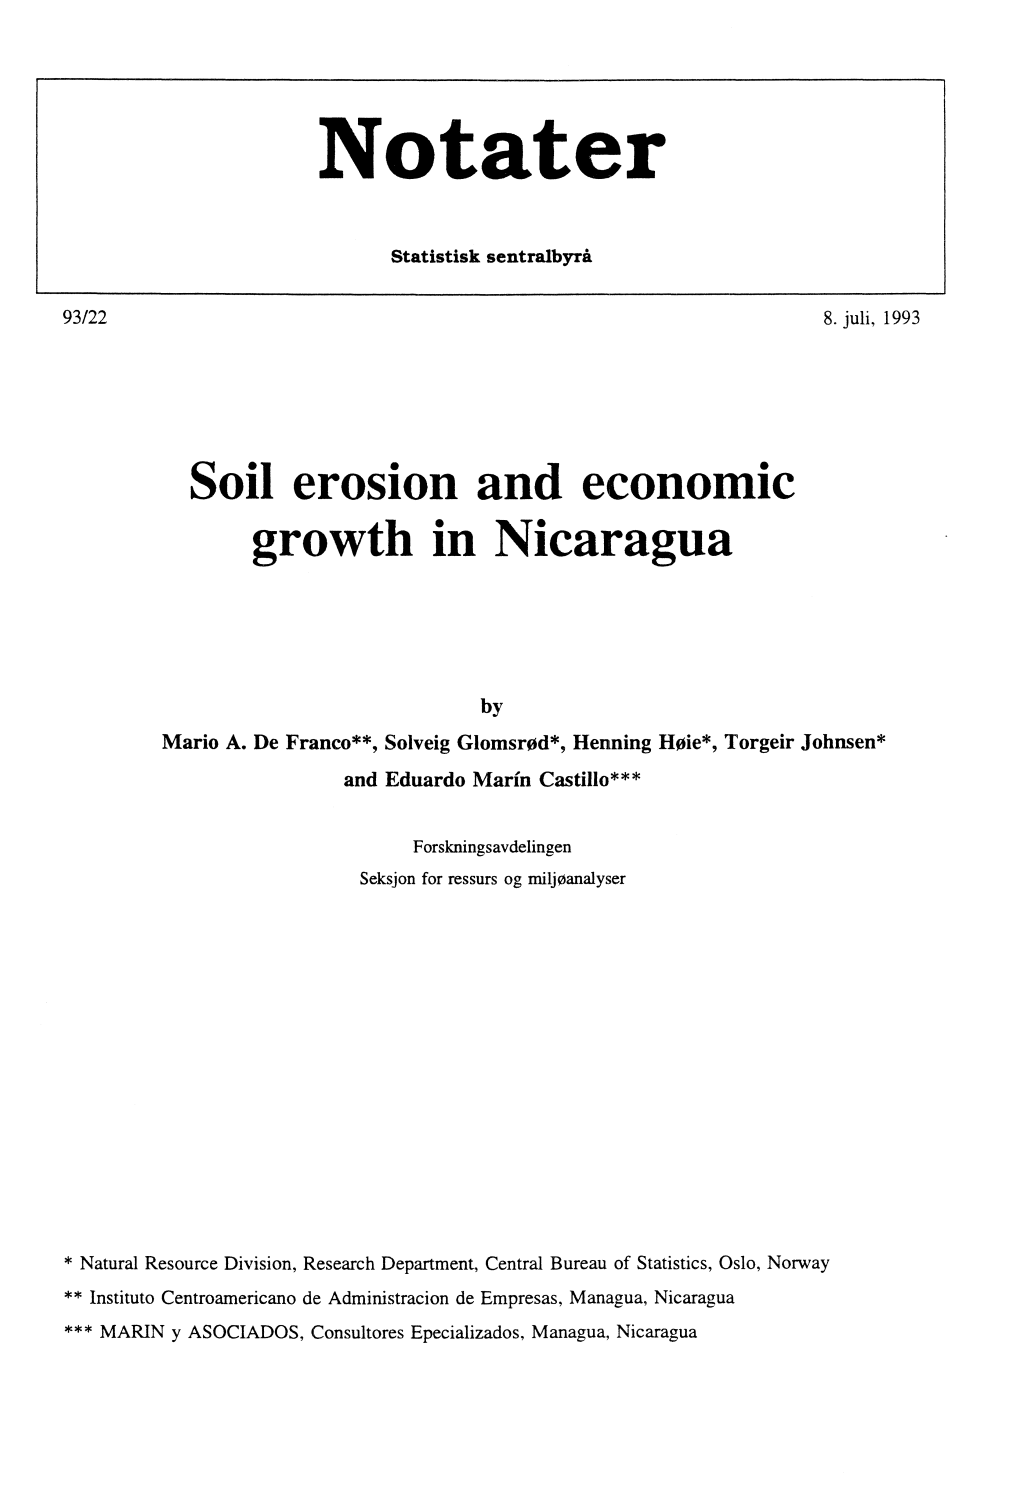 Soil Erosion and Economic Growth in Nicaragua